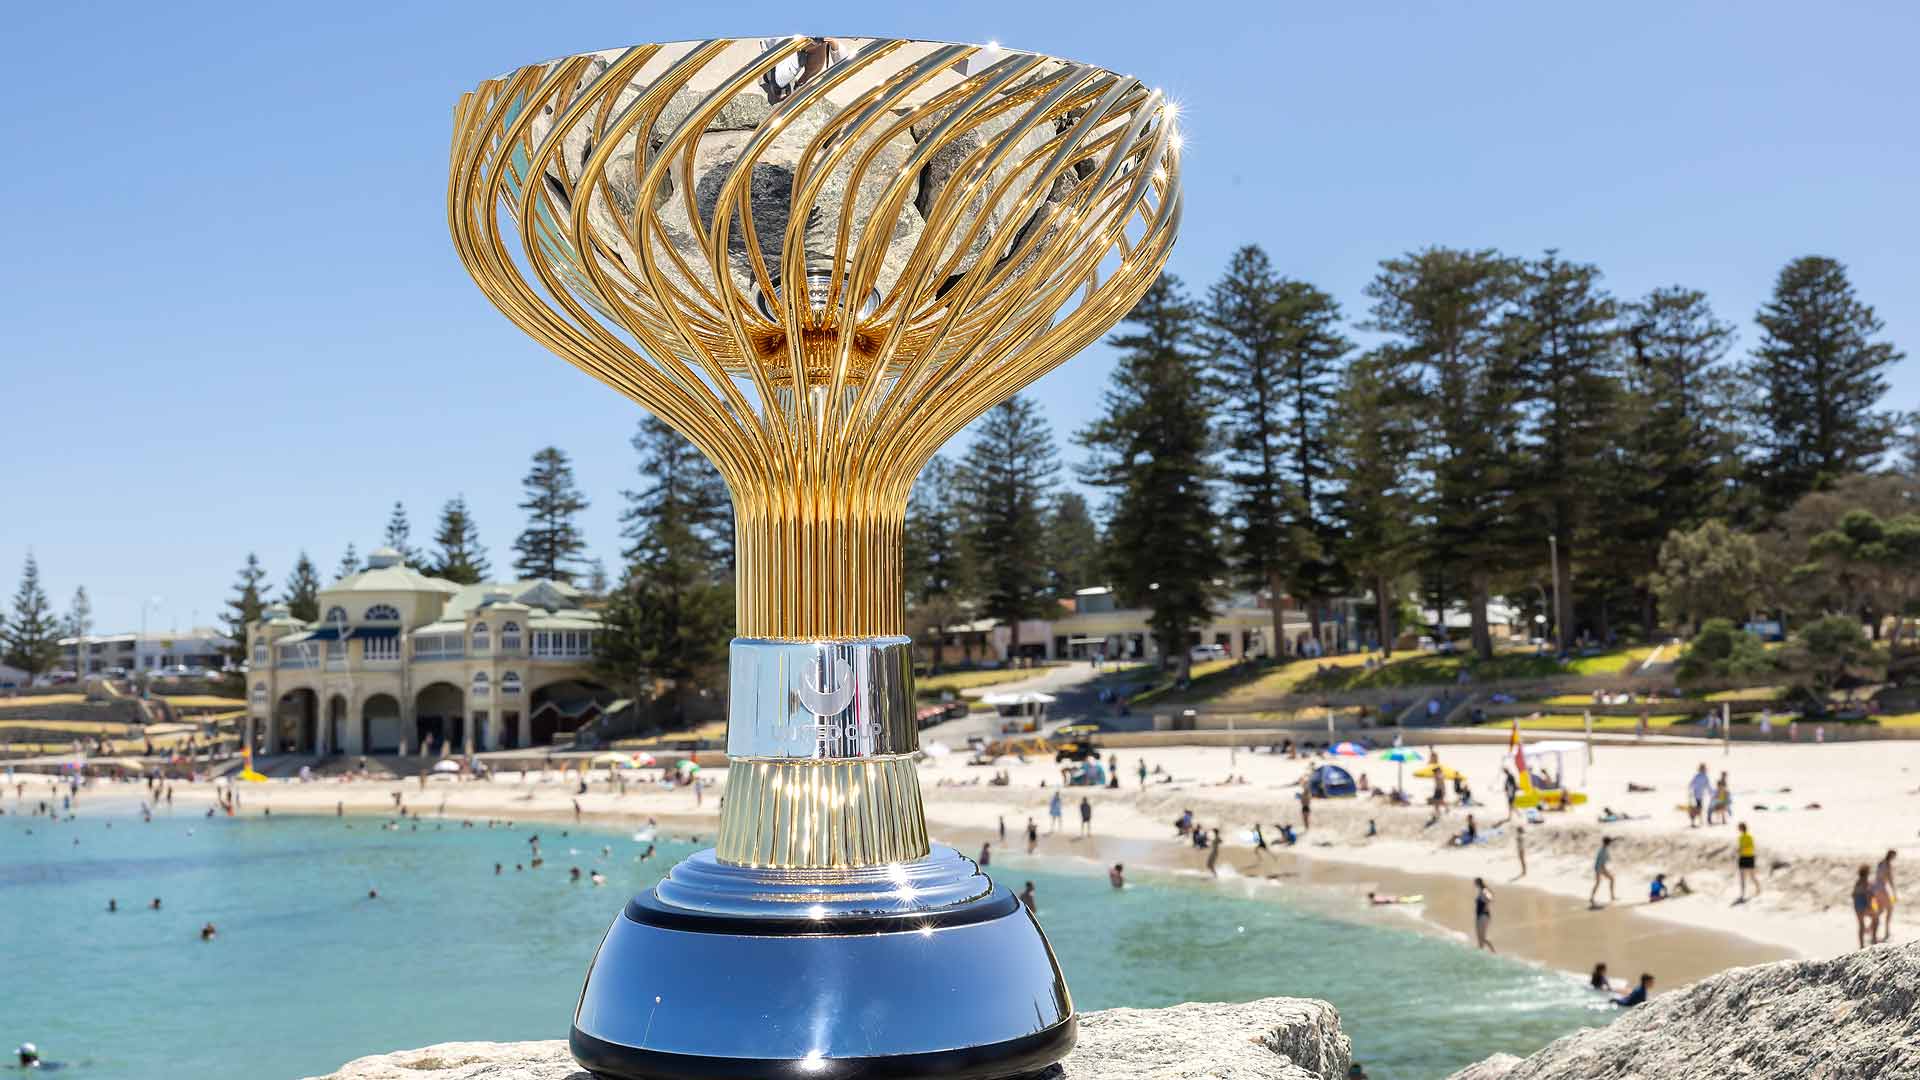 The United Cup was unveiled on Tuesday at Cottesloe Beach in Perth.